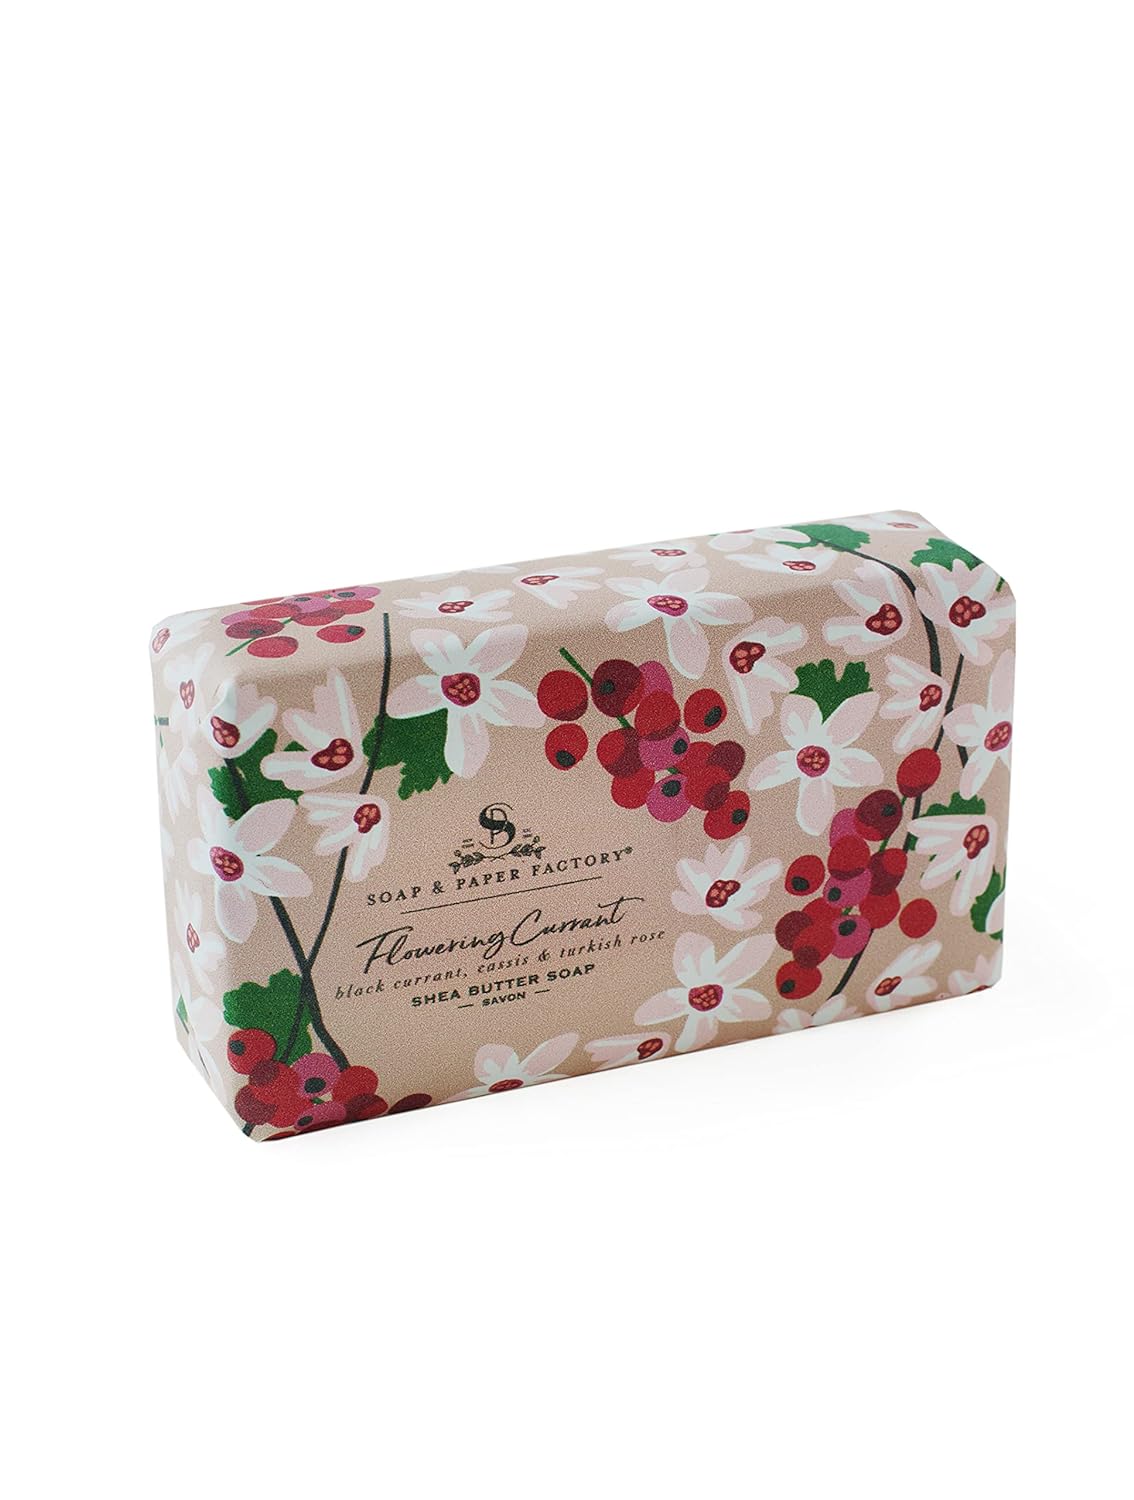 Soap & Paper Factory owering Currant 5  Shea Butter Soap Bar